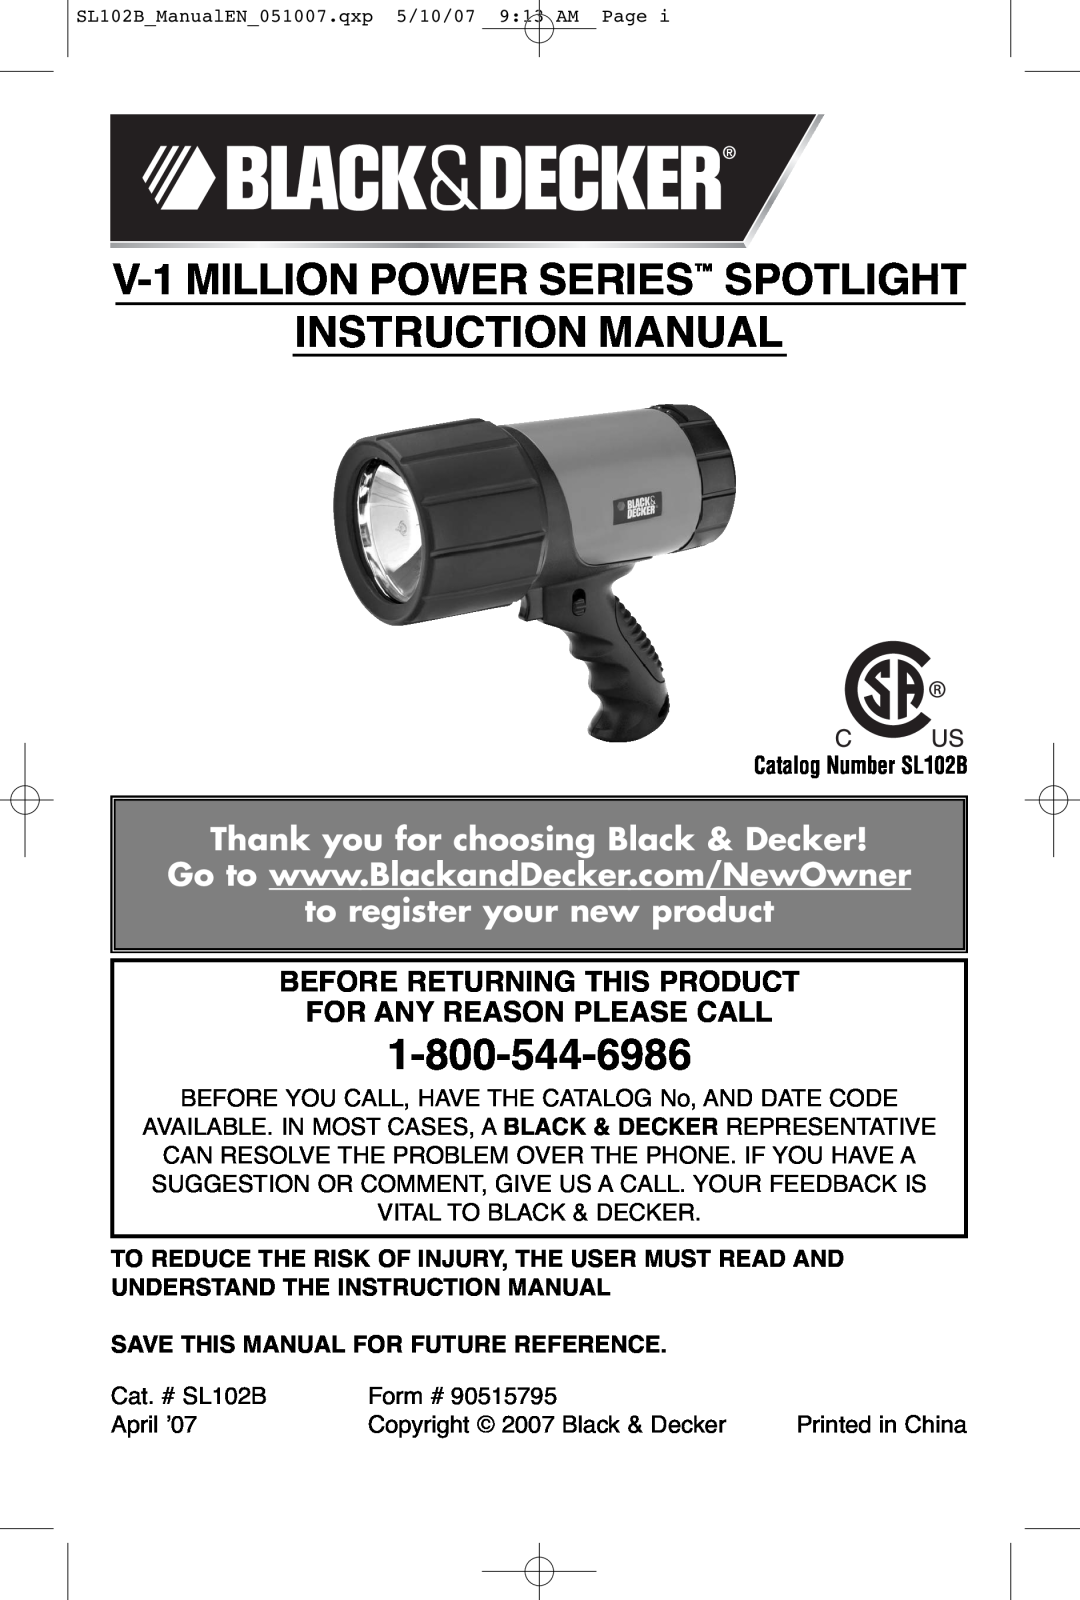 Black & Decker V-1 Million, 90515795 instruction manual Catalog Number SL102B, Save This Manual For Future Reference 